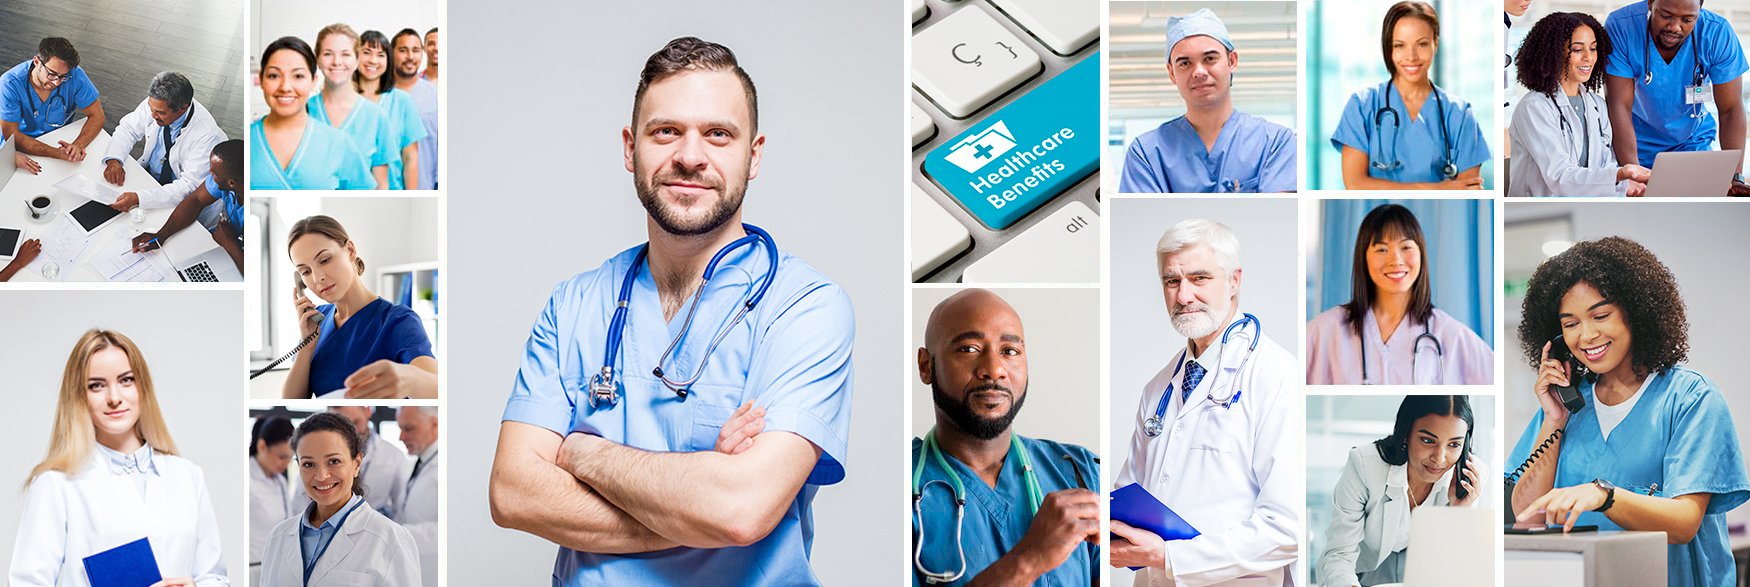 A collage of doctors and nurses answering the phone, talking to each other, looking straight forward, and a blue healthcare keyboard image. vcpstaff.com | Healthcare Staffing